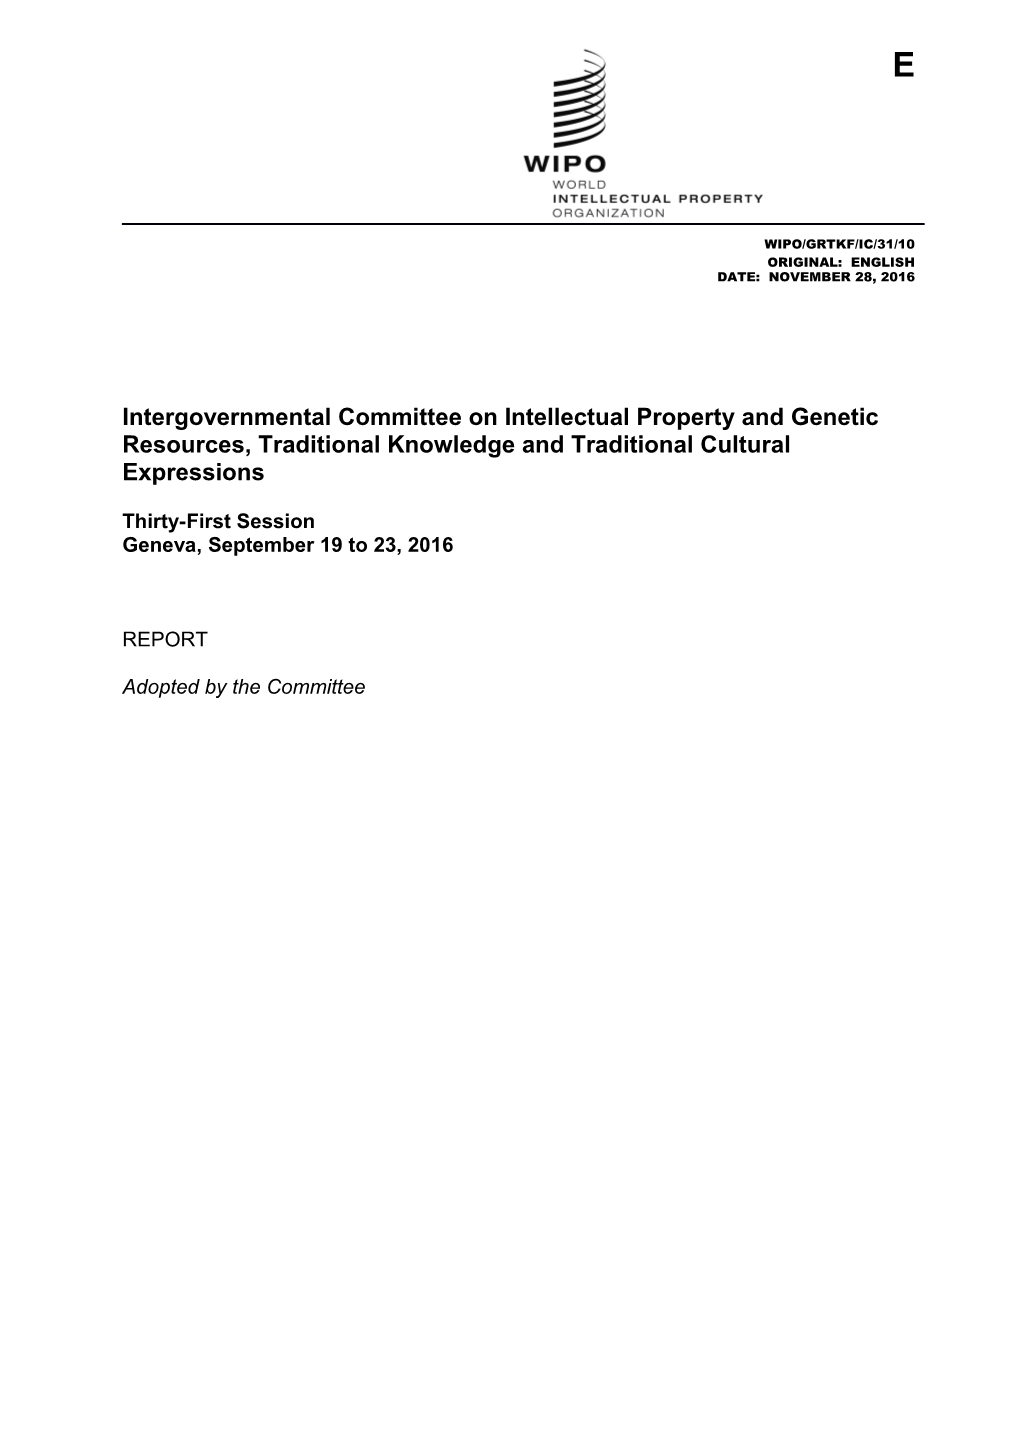 Intergovernmental Committee on Intellectual Property and Genetic Resources, Traditional s5